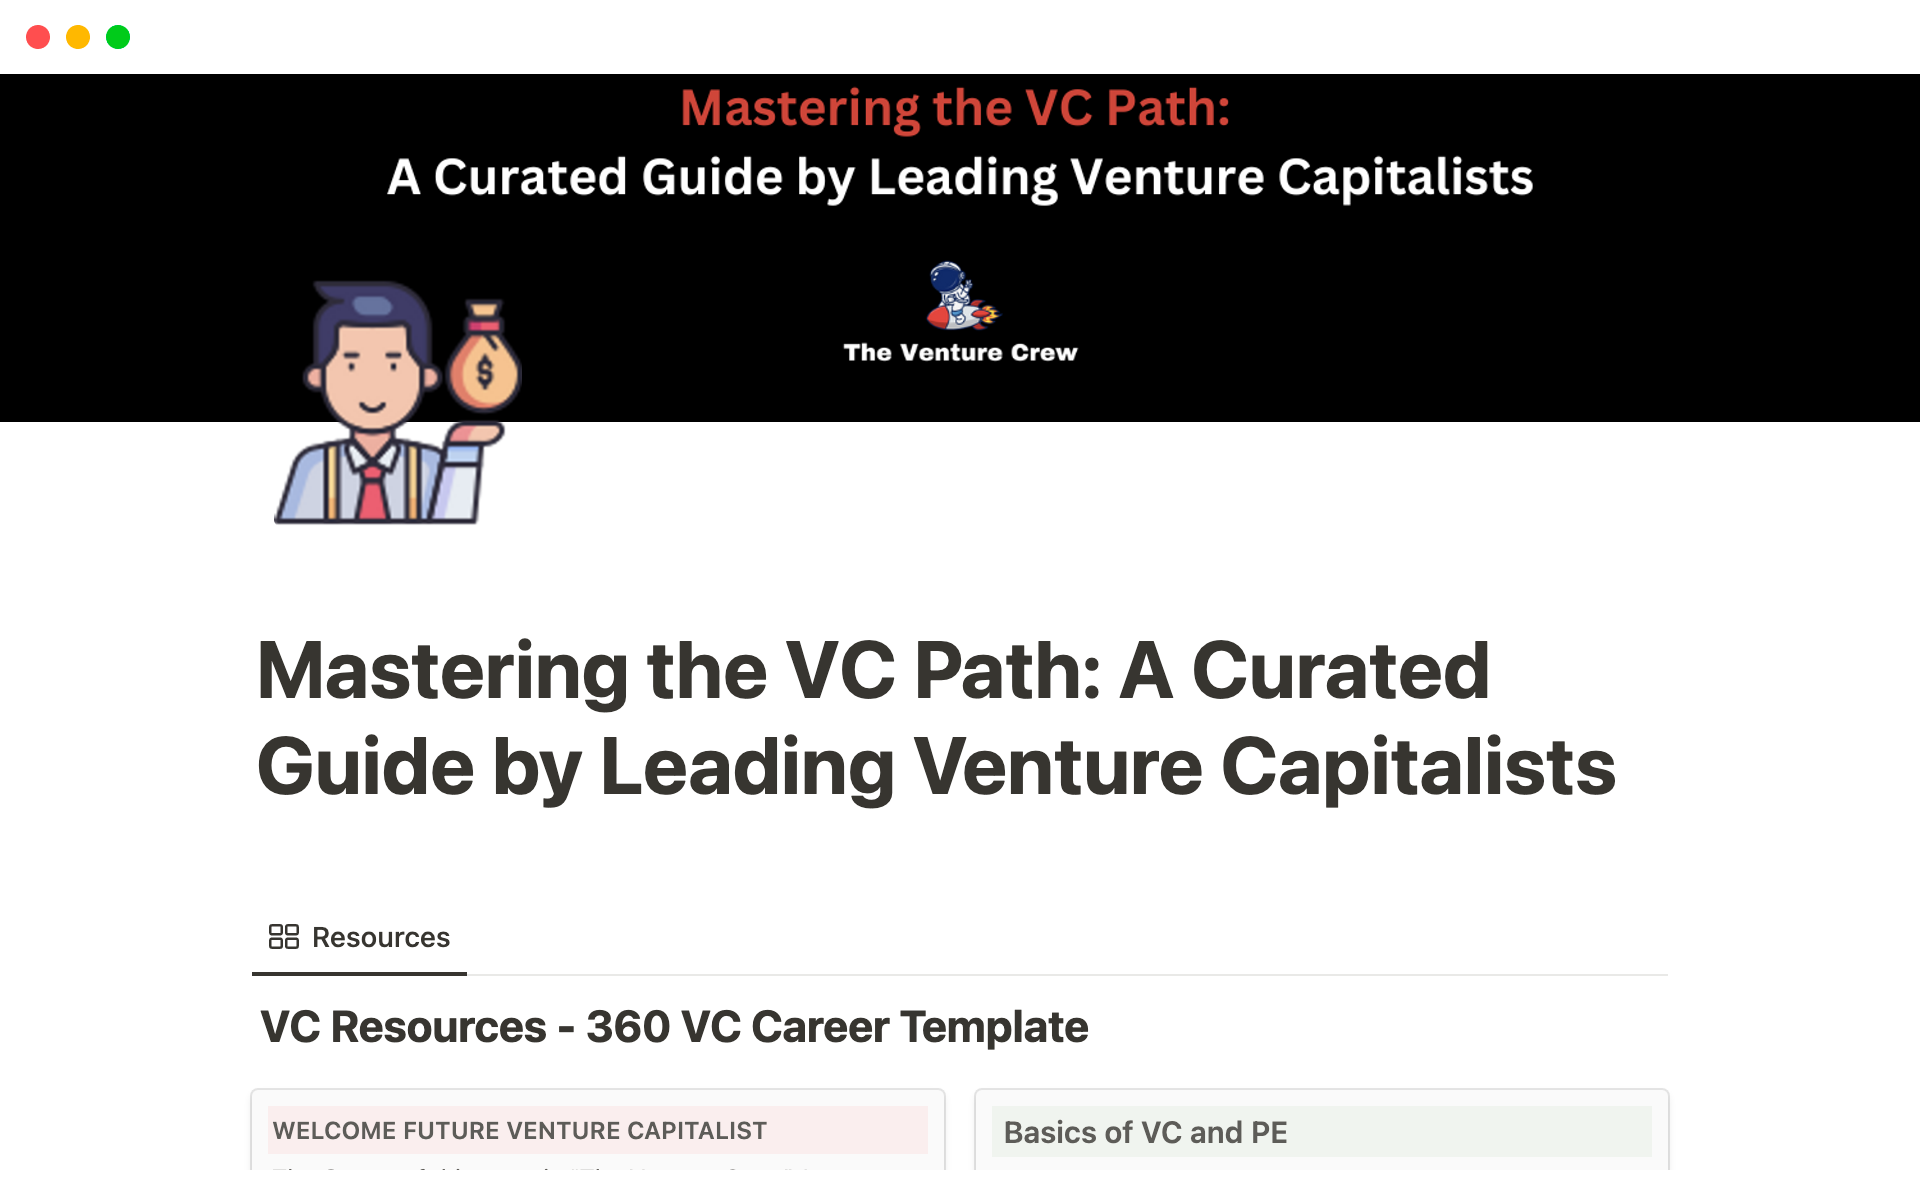 Mastering the VC Path: A Curated Guide by Leading Venture Capitalists님의 템플릿 미리보기